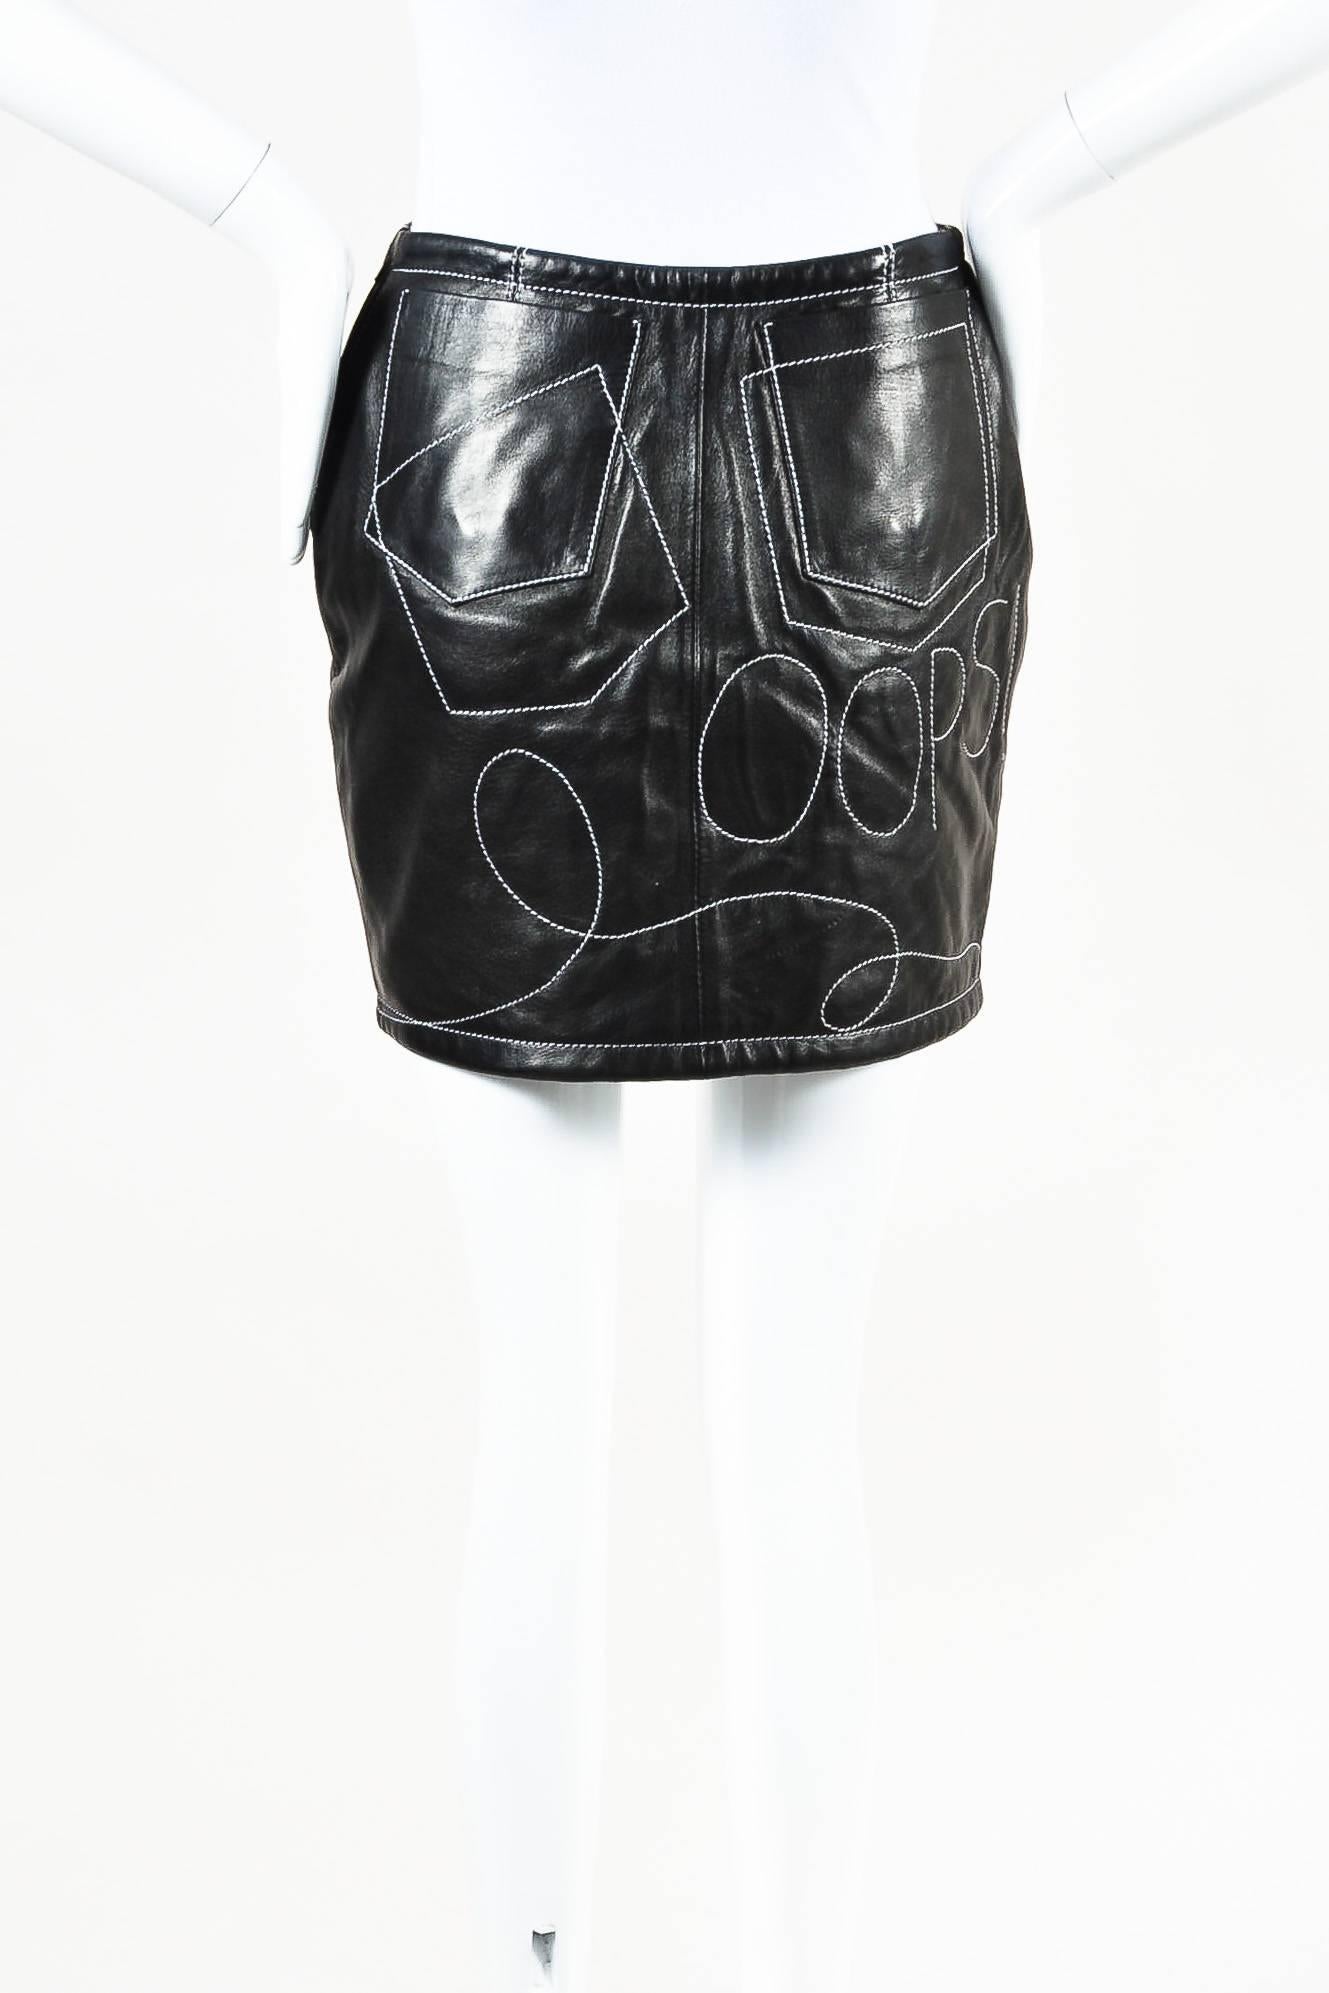 Moschino Black & White Leather Top Stitched Mini Skirt SZ 42 In Excellent Condition For Sale In Chicago, IL